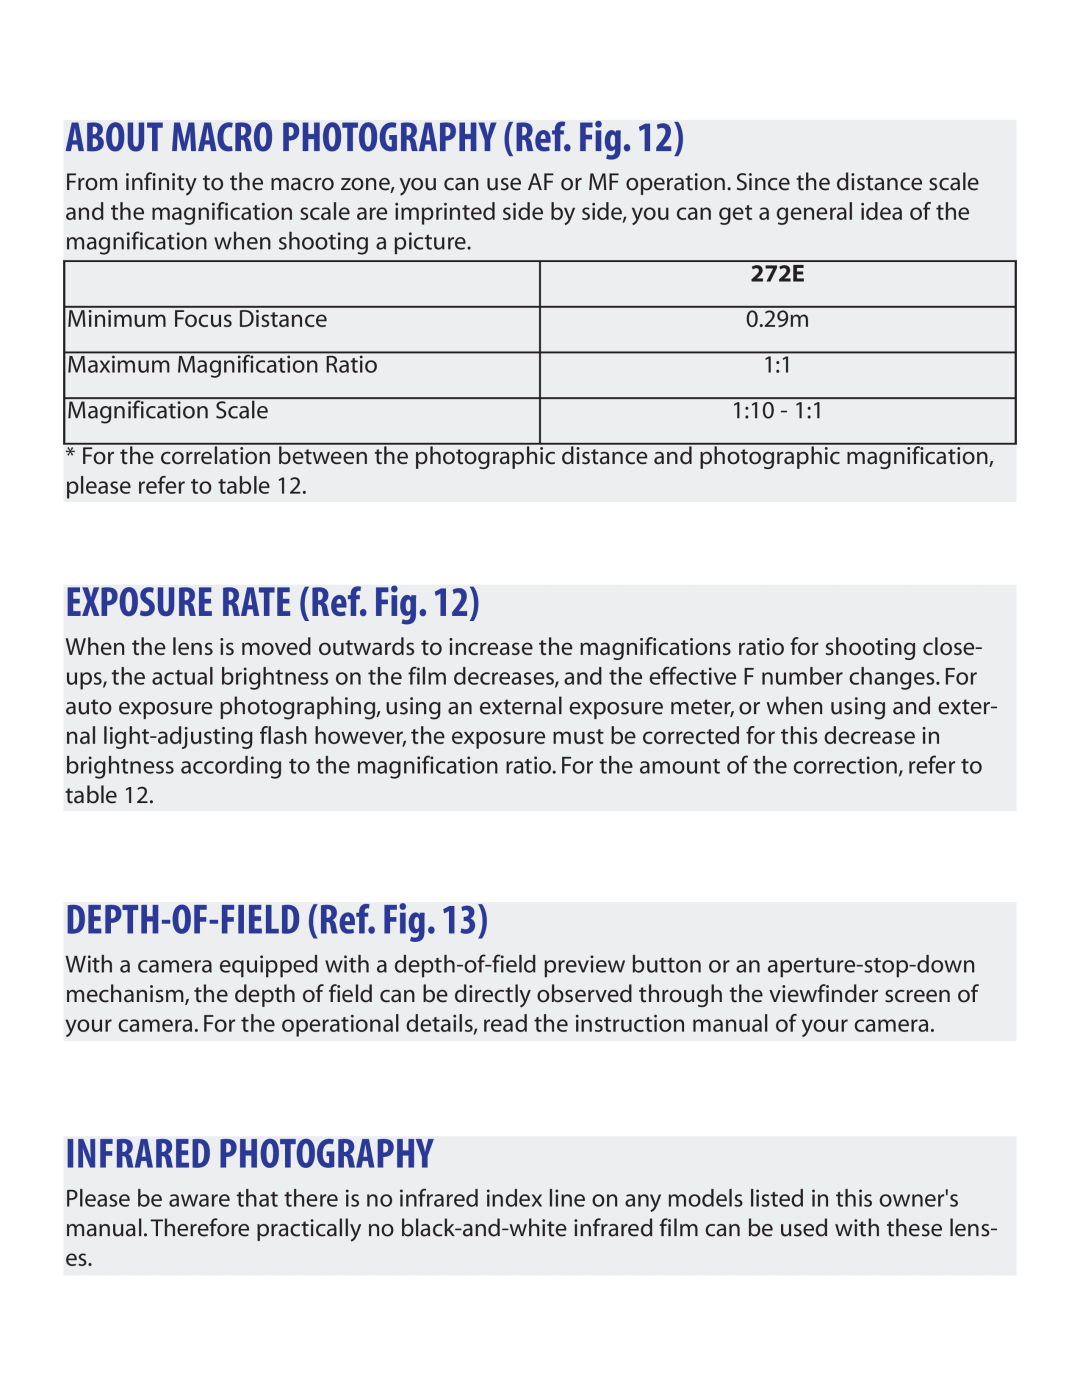 Tamron AF272NII700 ABOUT MACRO PHOTOGRAPHY Ref. Fig, EXPOSURE RATE Ref. Fig, DEPTH-OF-FIELD Ref. Fig, Infrared Photography 